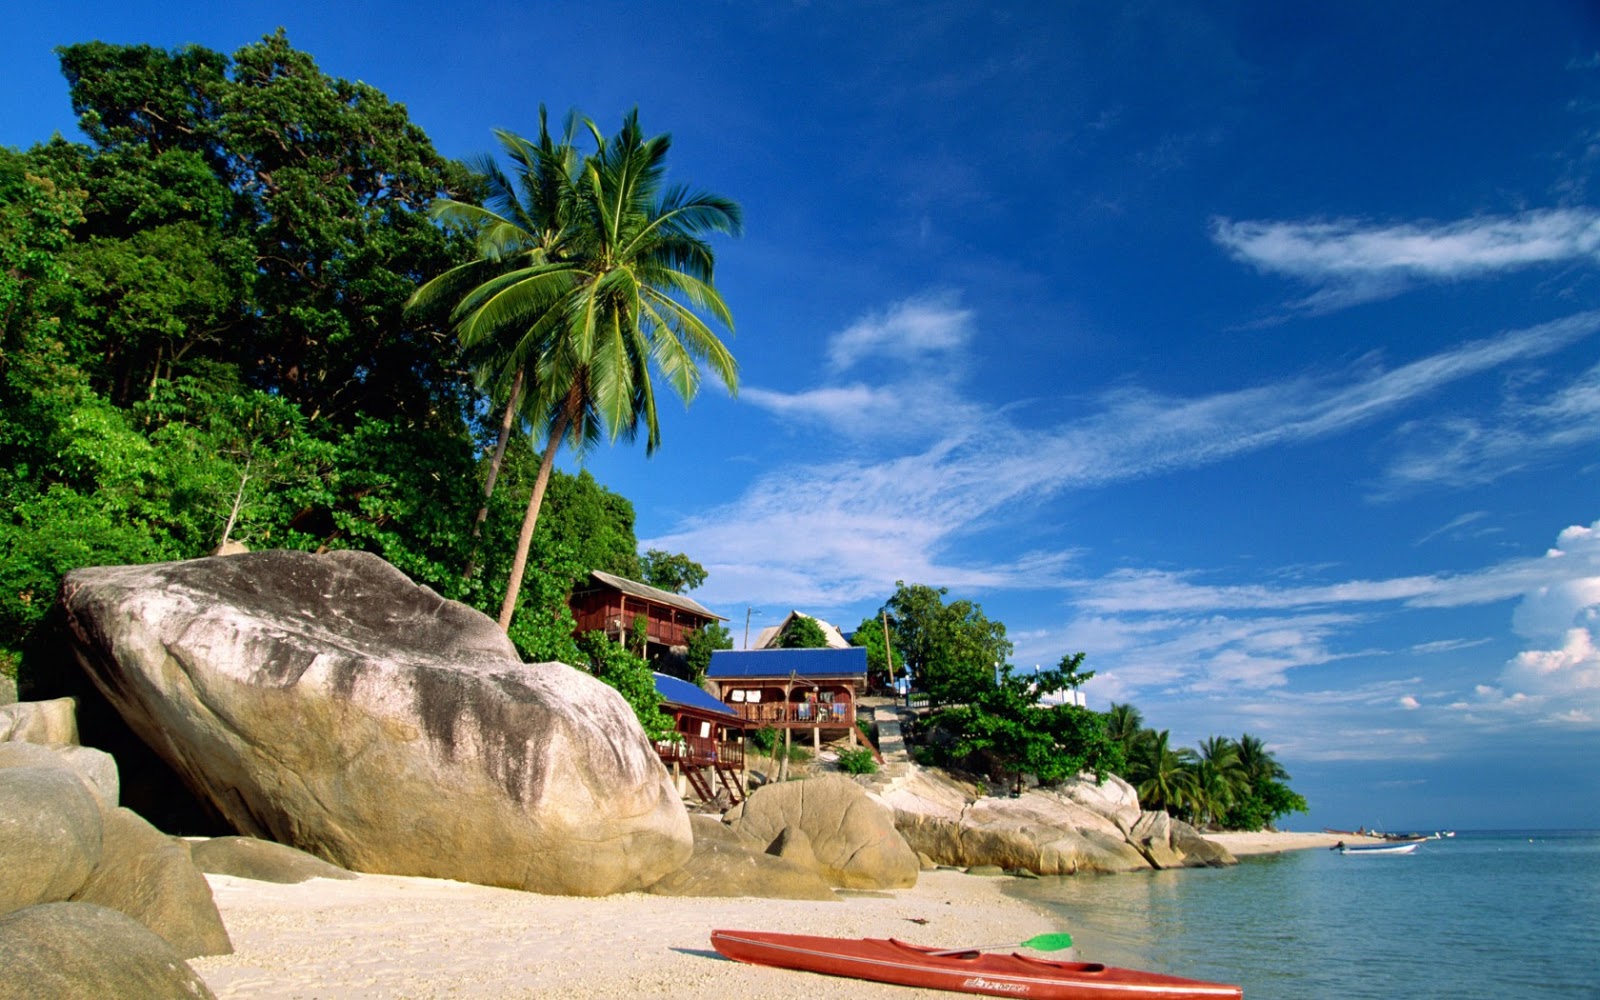 Places for Traveling: The Perhentian Islands Malaysia,